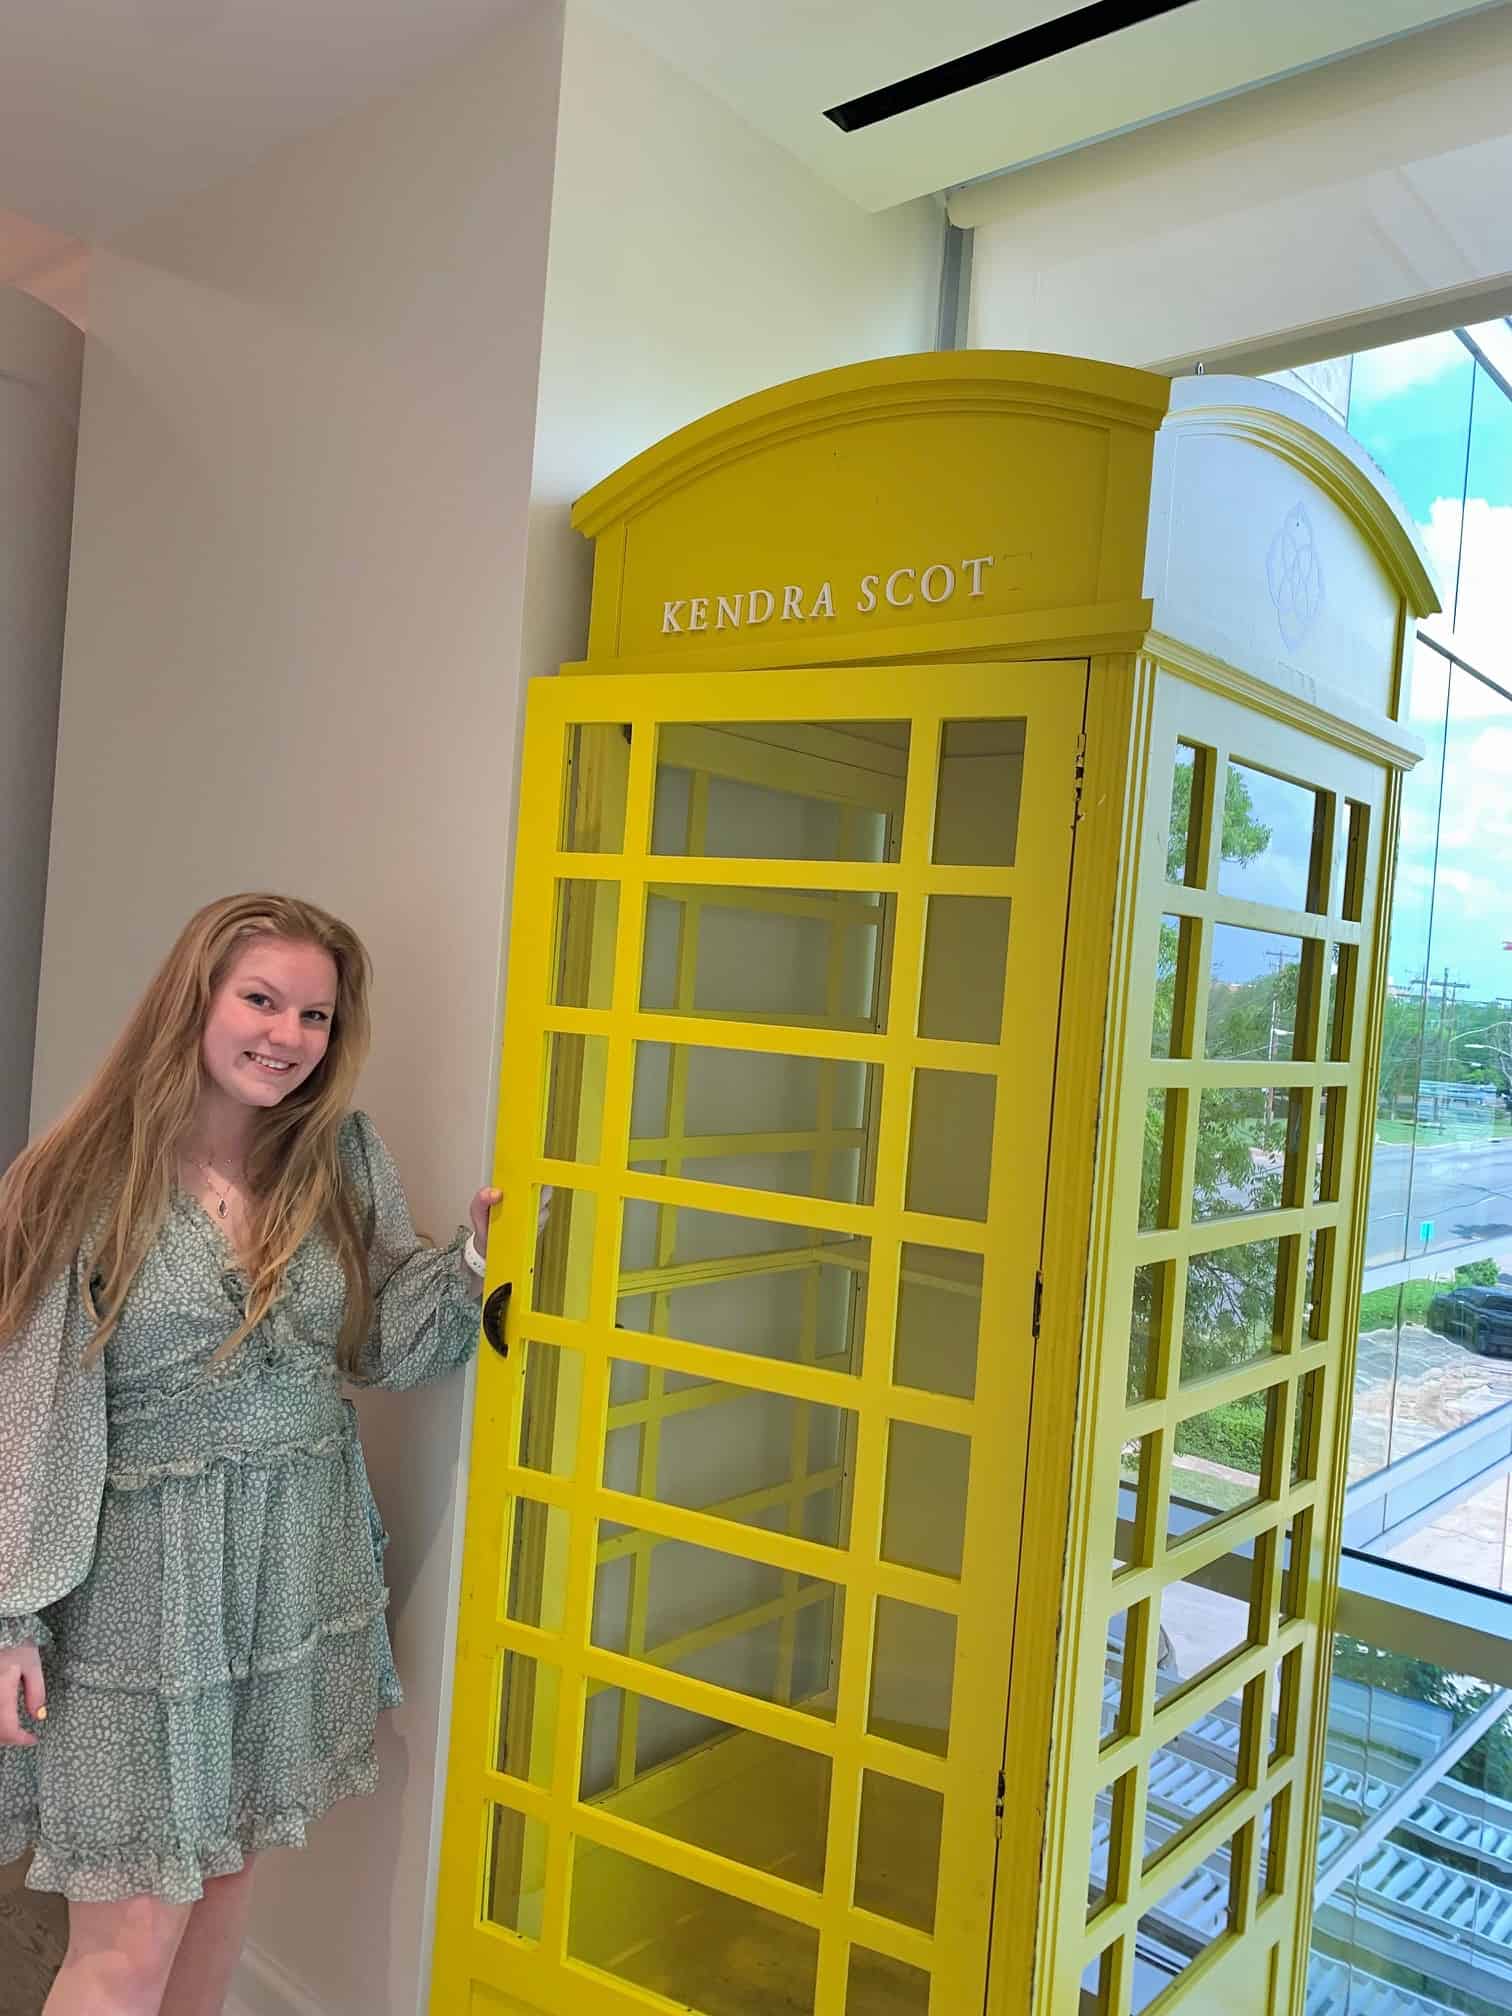 An image of Linley at Kendra Scott.